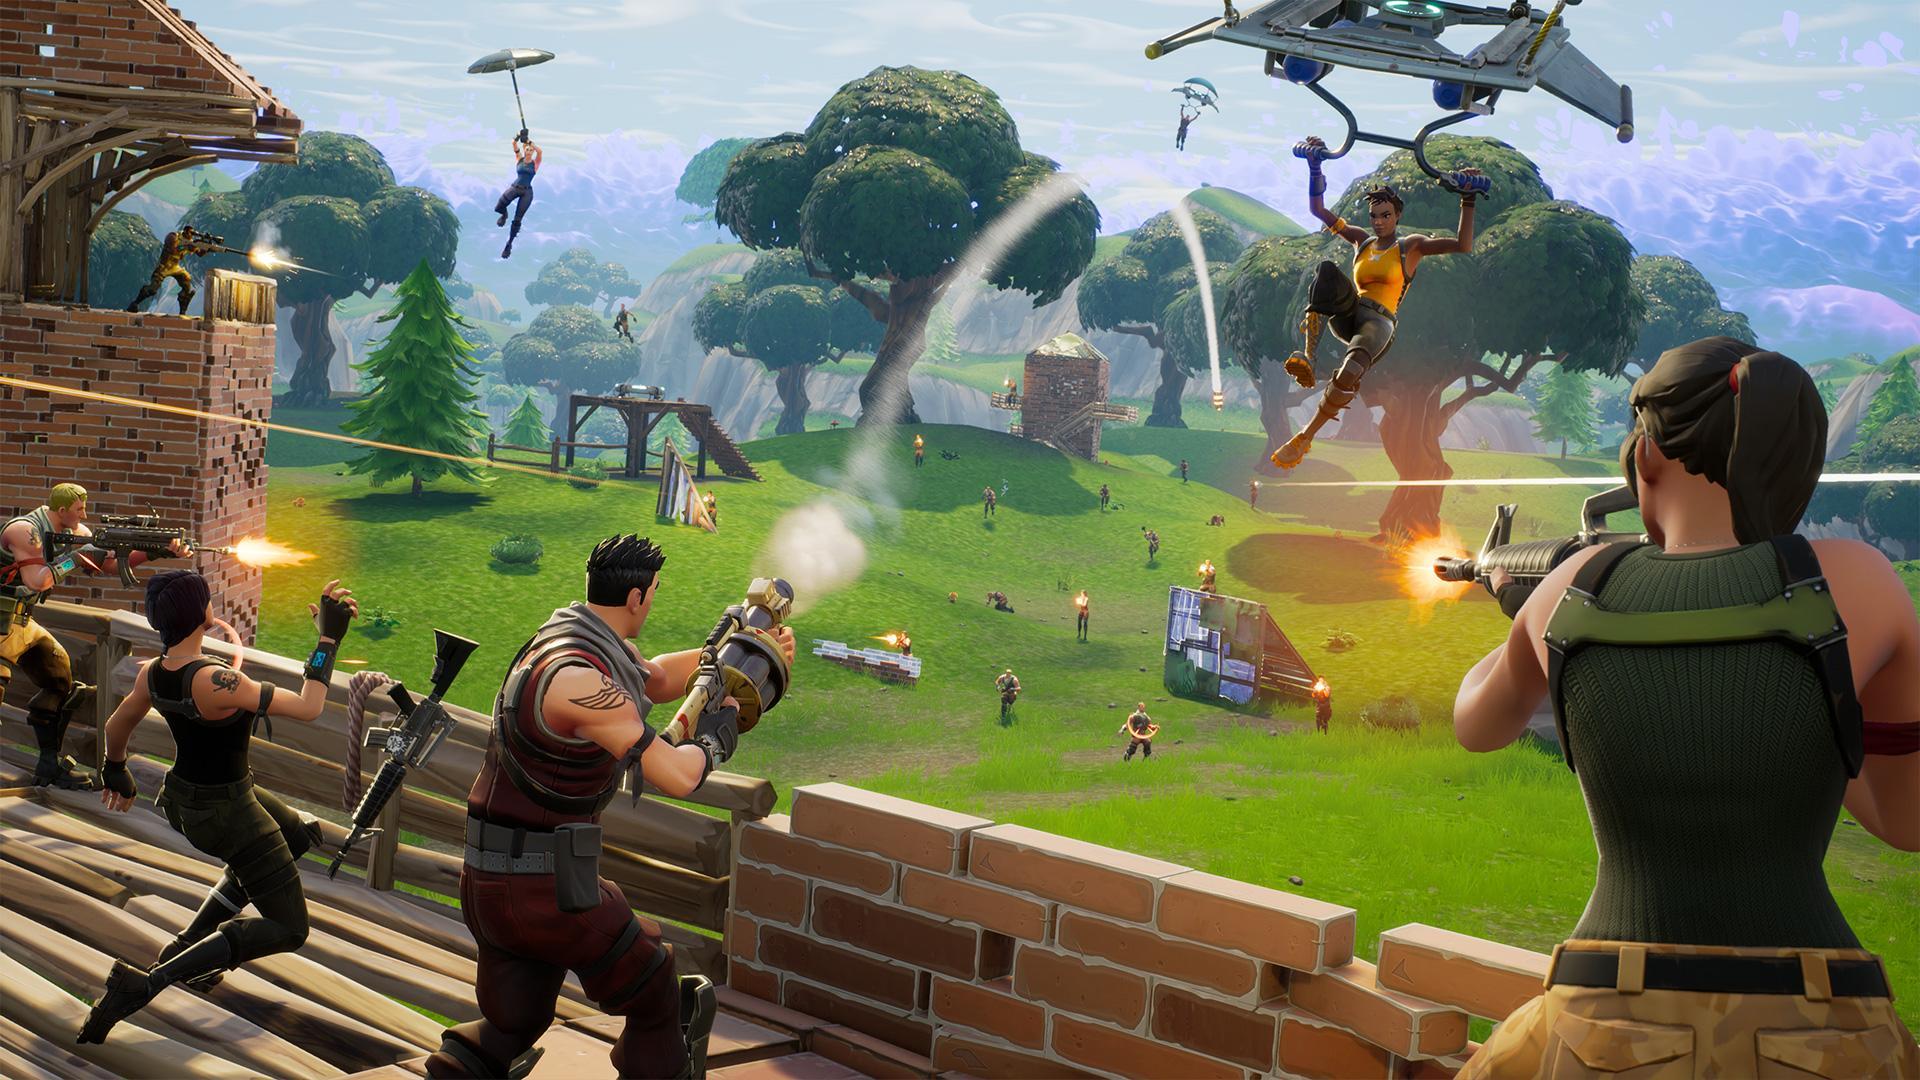 Epic Considering More Than 100 Players in Fortnite Battle Royale and